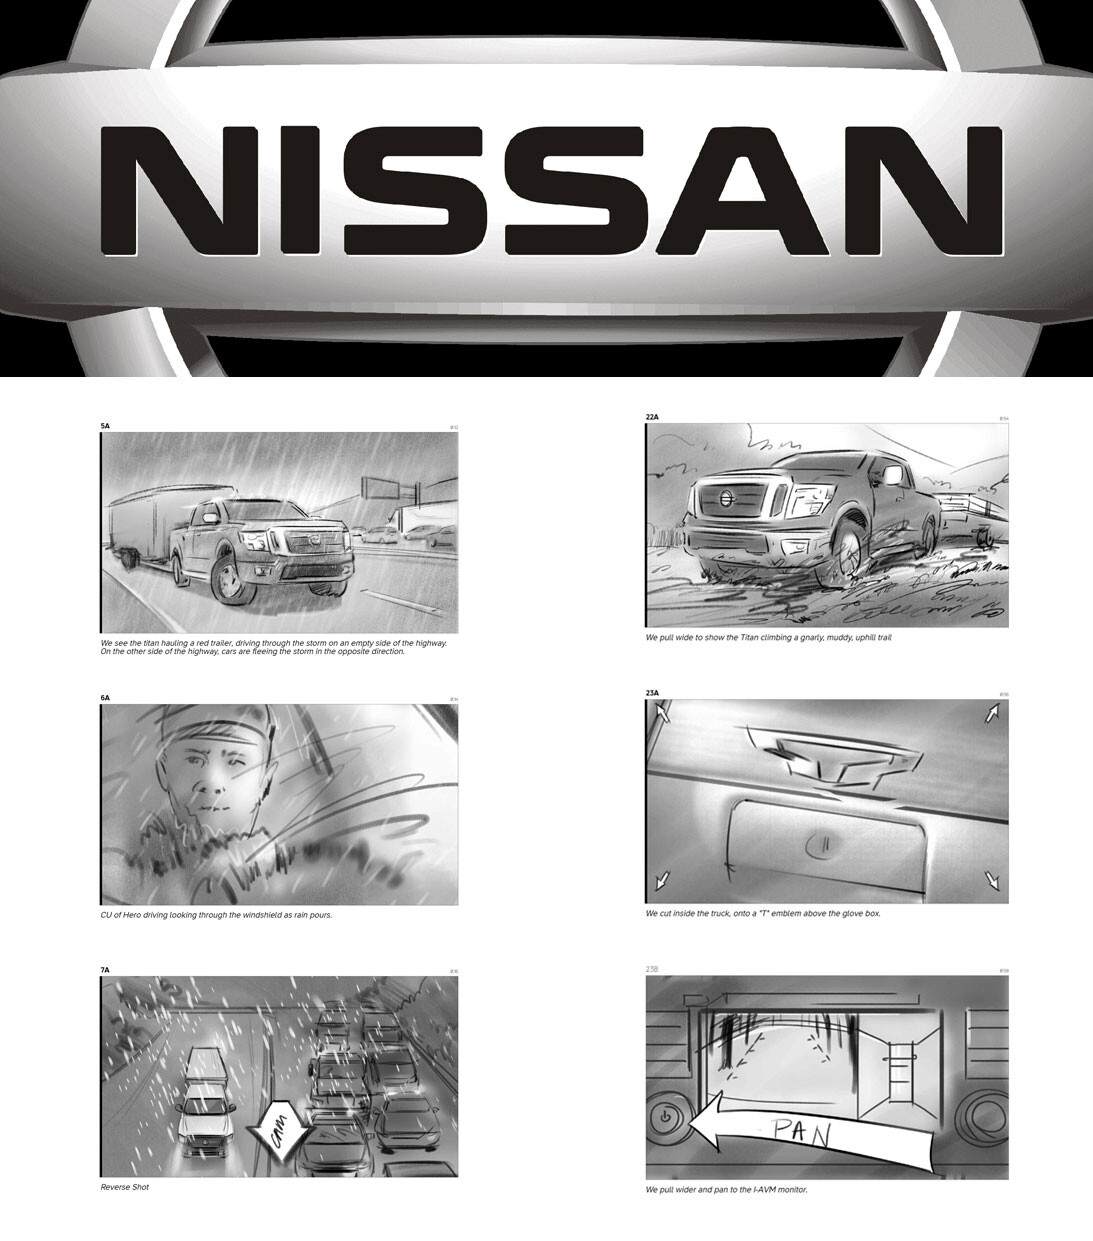 Nissan Calling All Titans